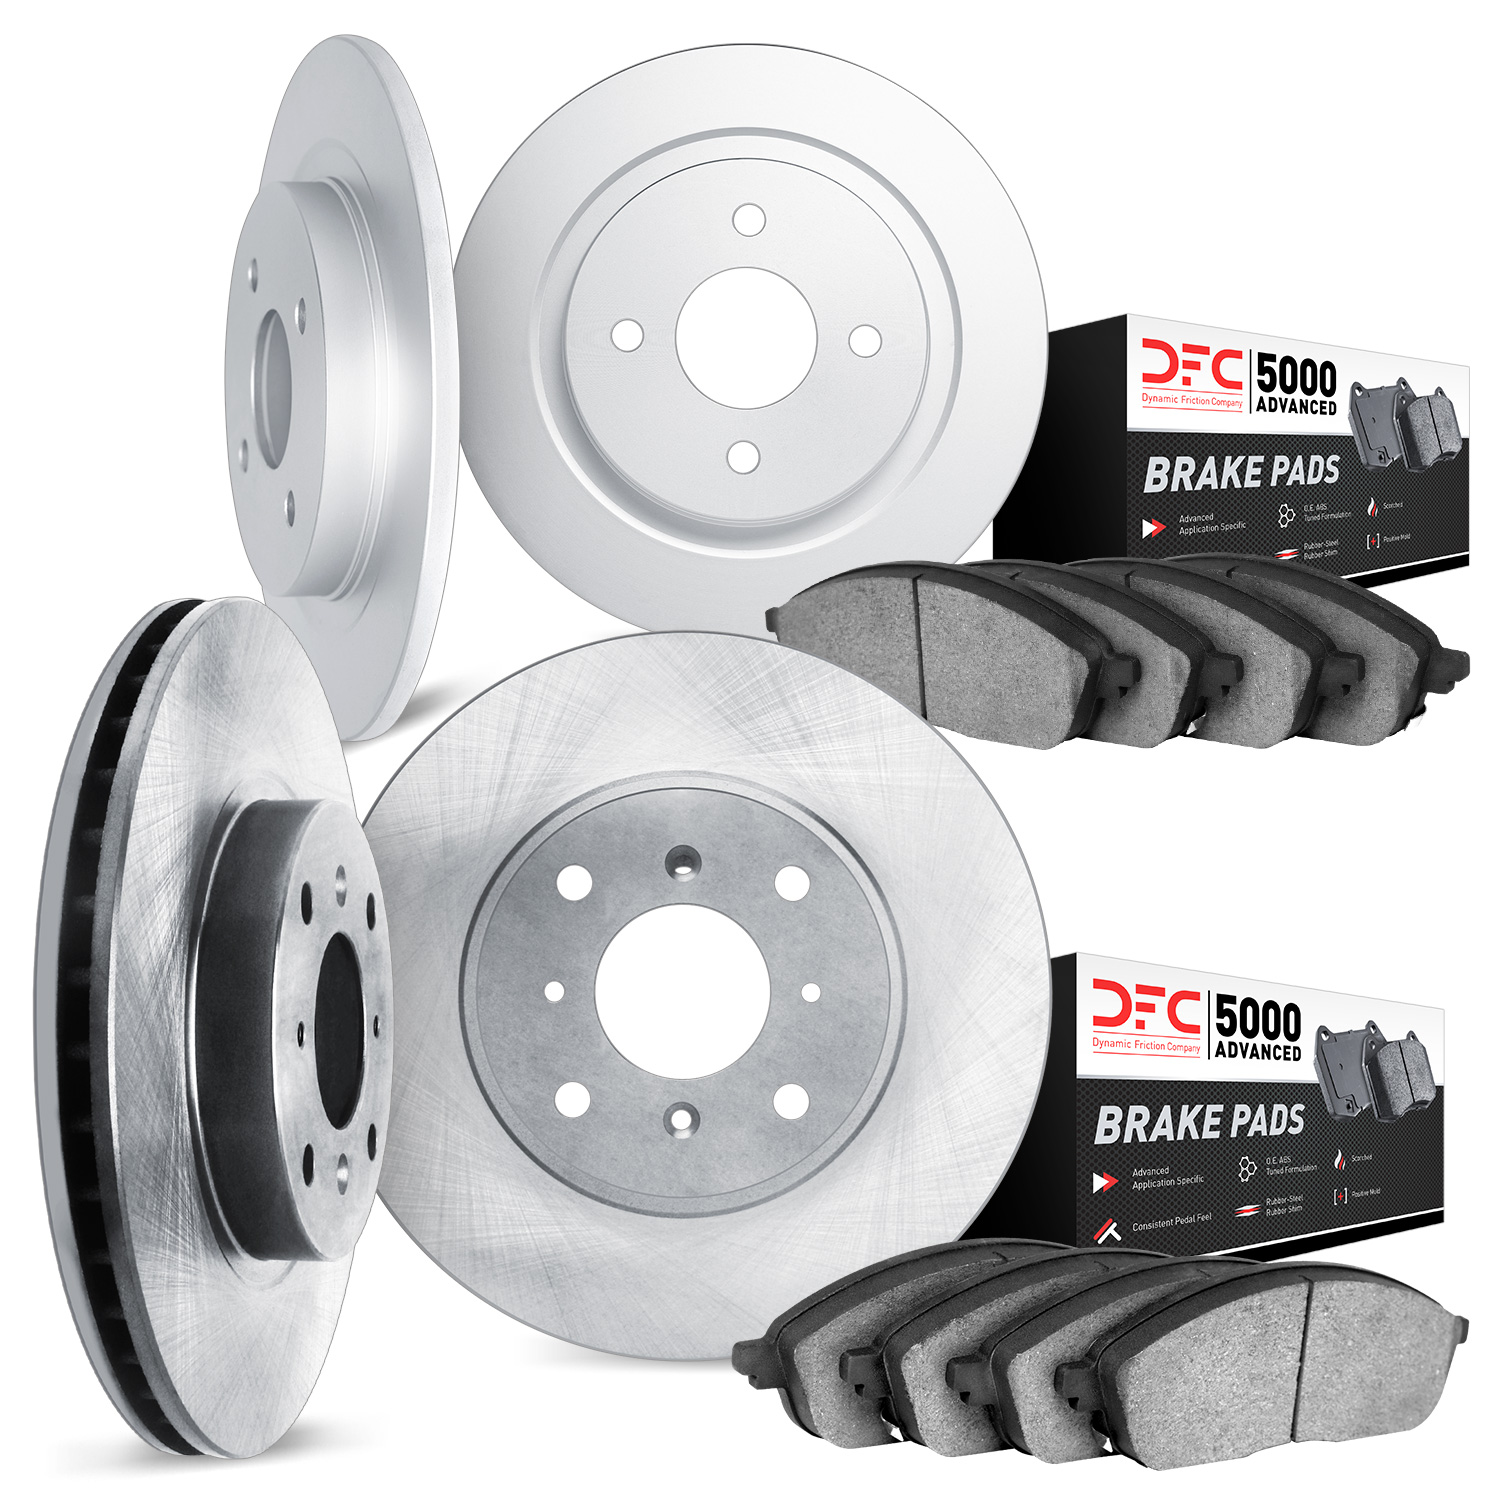 6504-01001 Brake Rotors w/5000 Advanced Brake Pads Kit, 2004-2009 Multiple Makes/Models, Position: Front and Rear